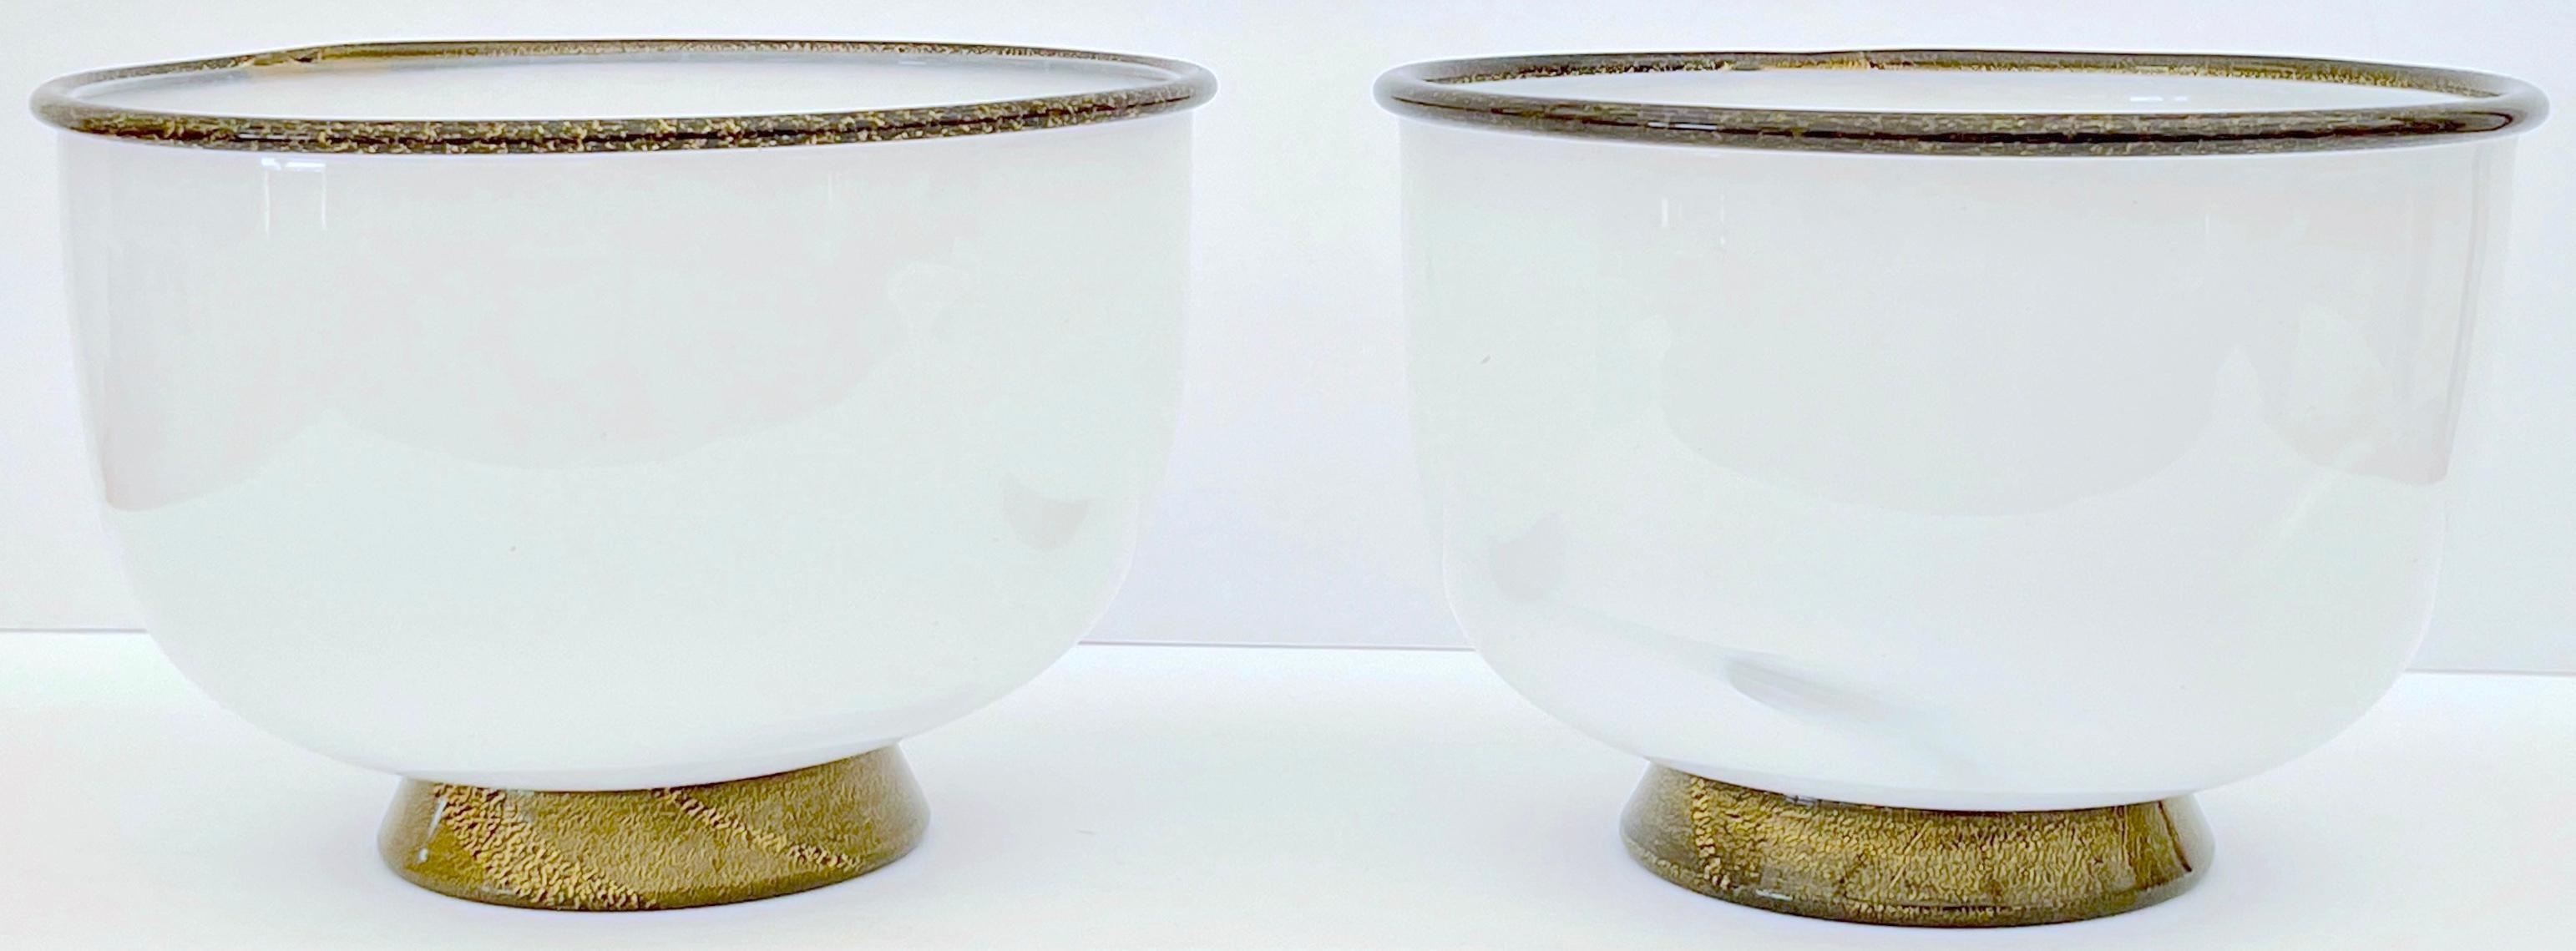 Pair Signed Barovier & Toso Murano 'Primavera' Bowls  For Sale 6